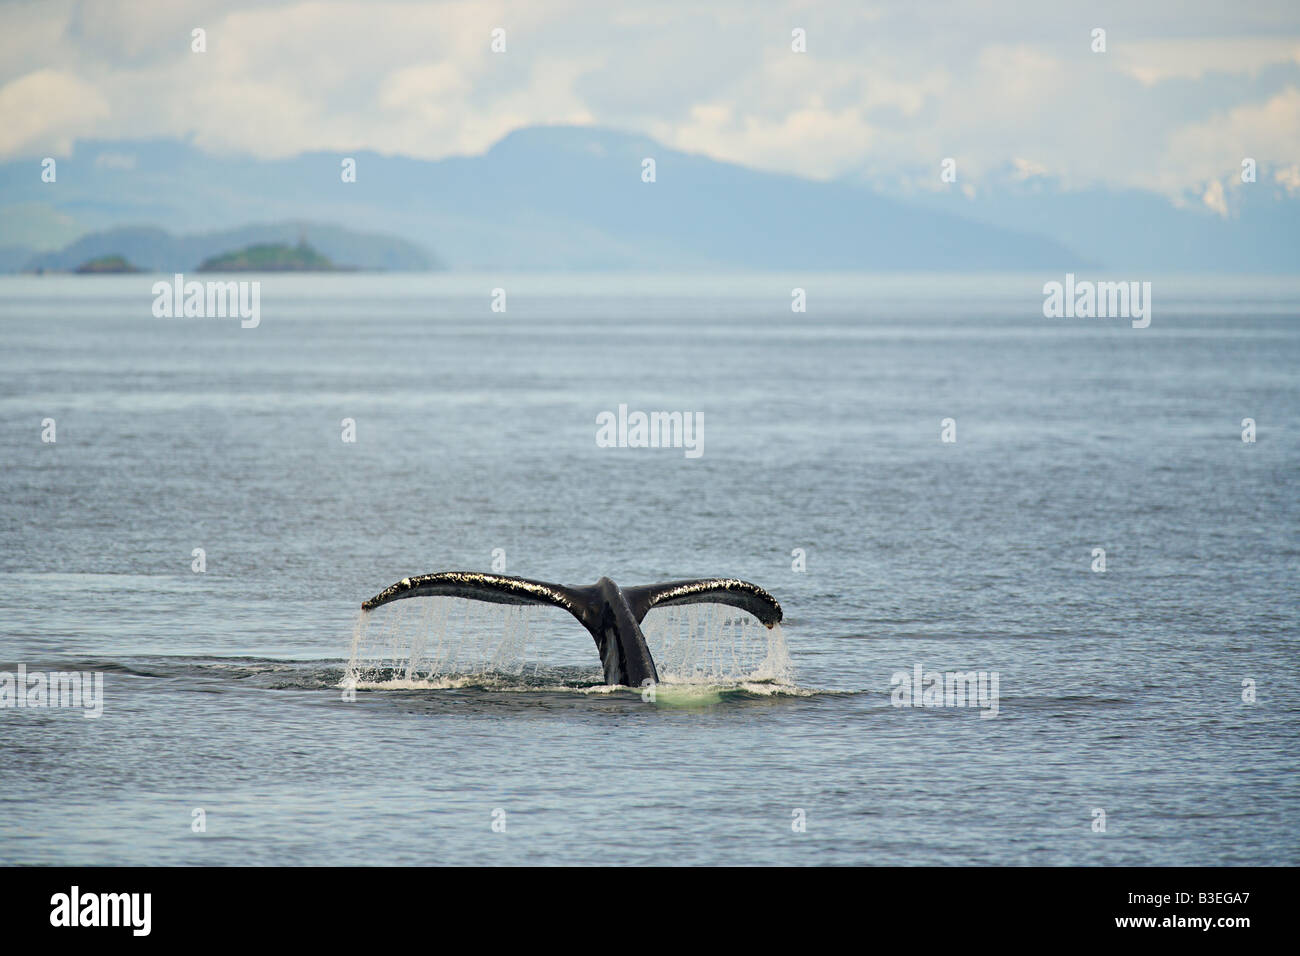 Tail of humpback whale Stock Photo